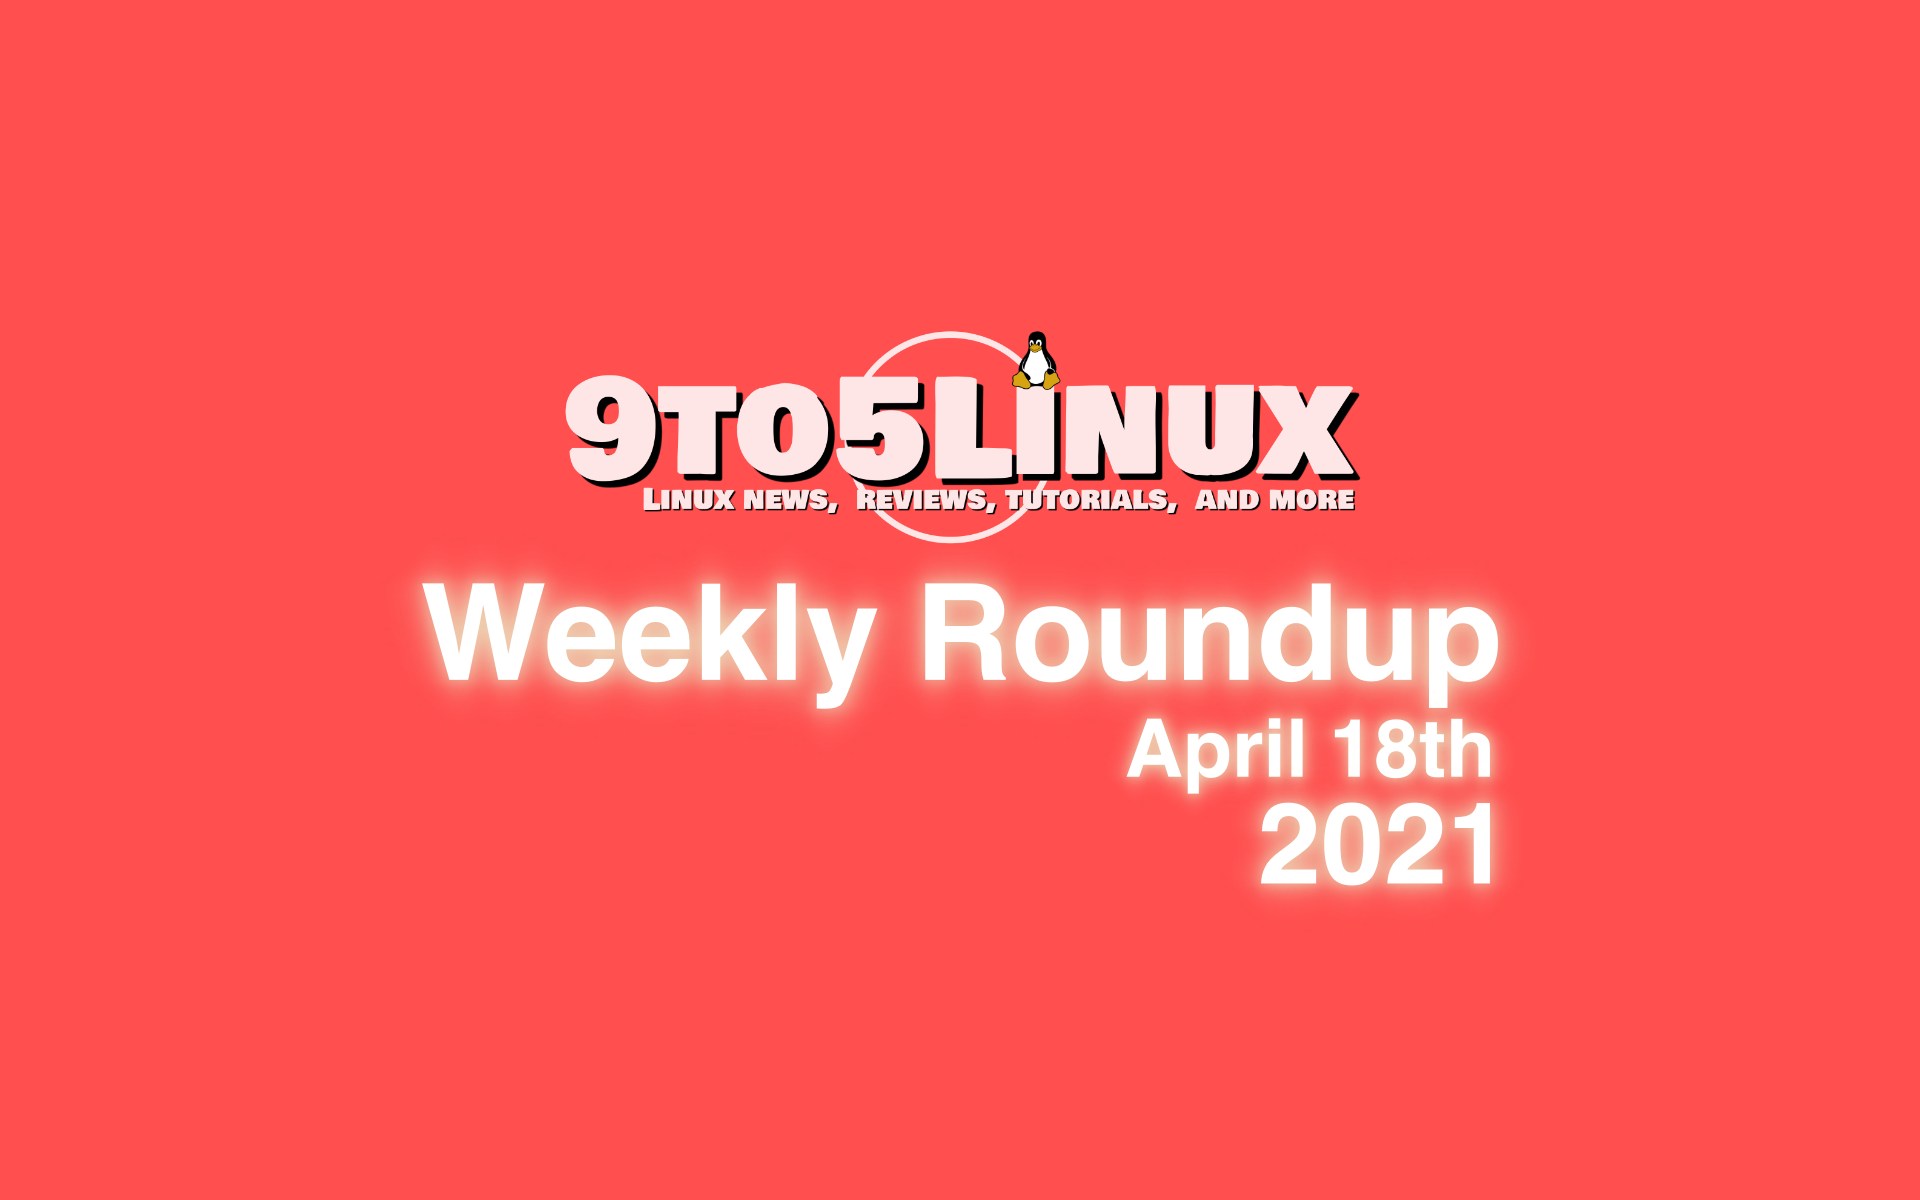 9to5Linux Weekly Roundup: April 18th, 2021